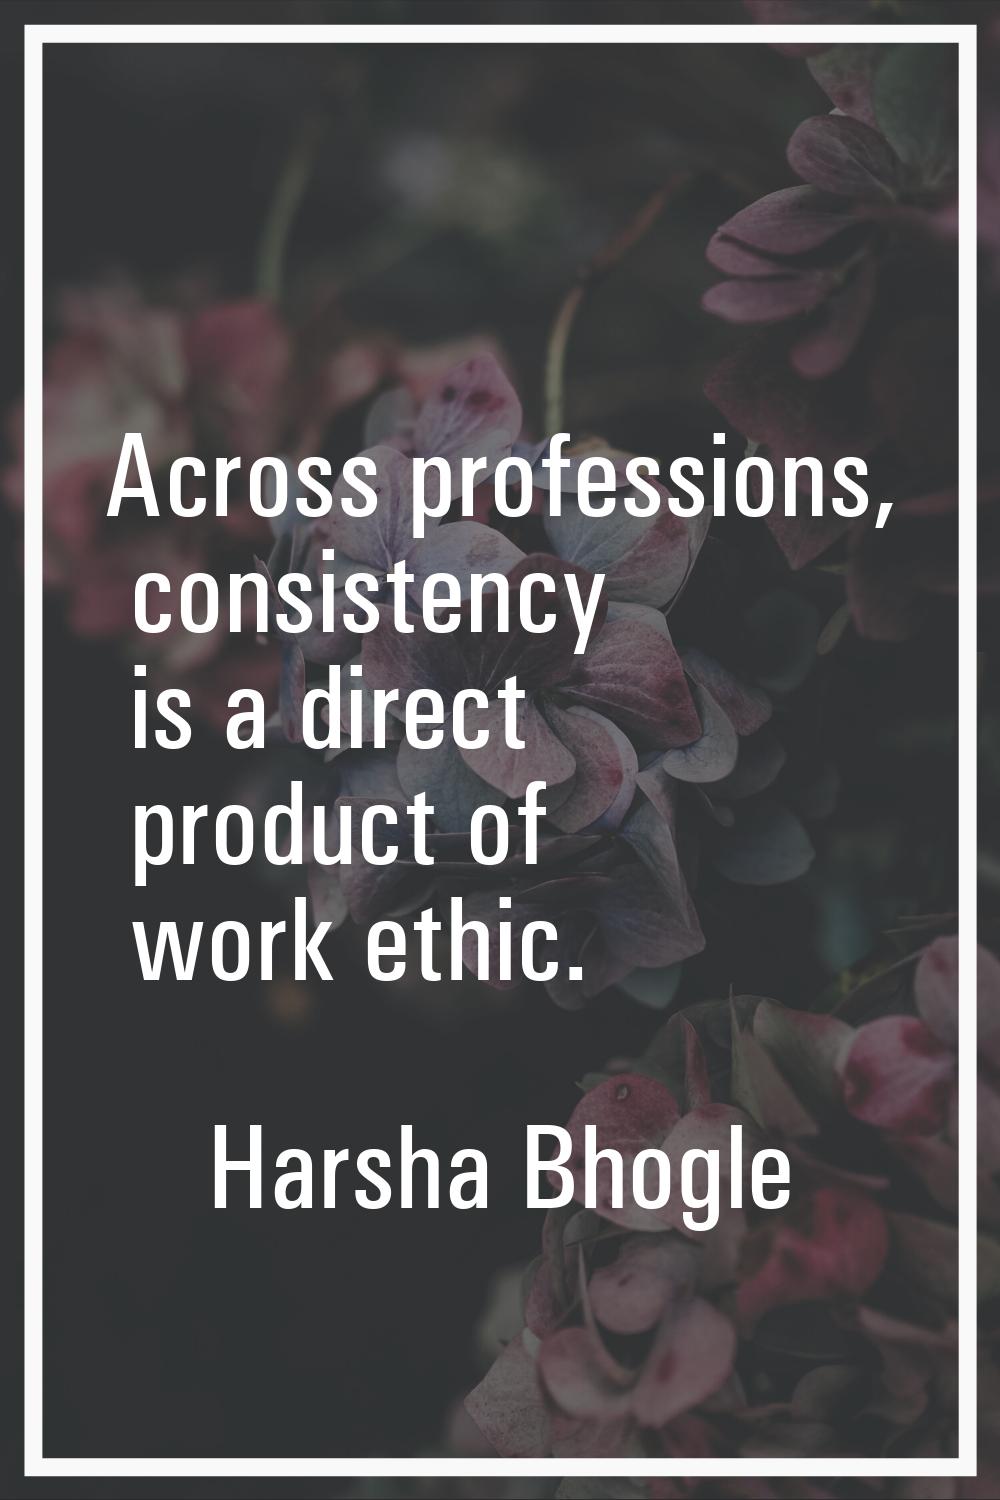 Across professions, consistency is a direct product of work ethic.